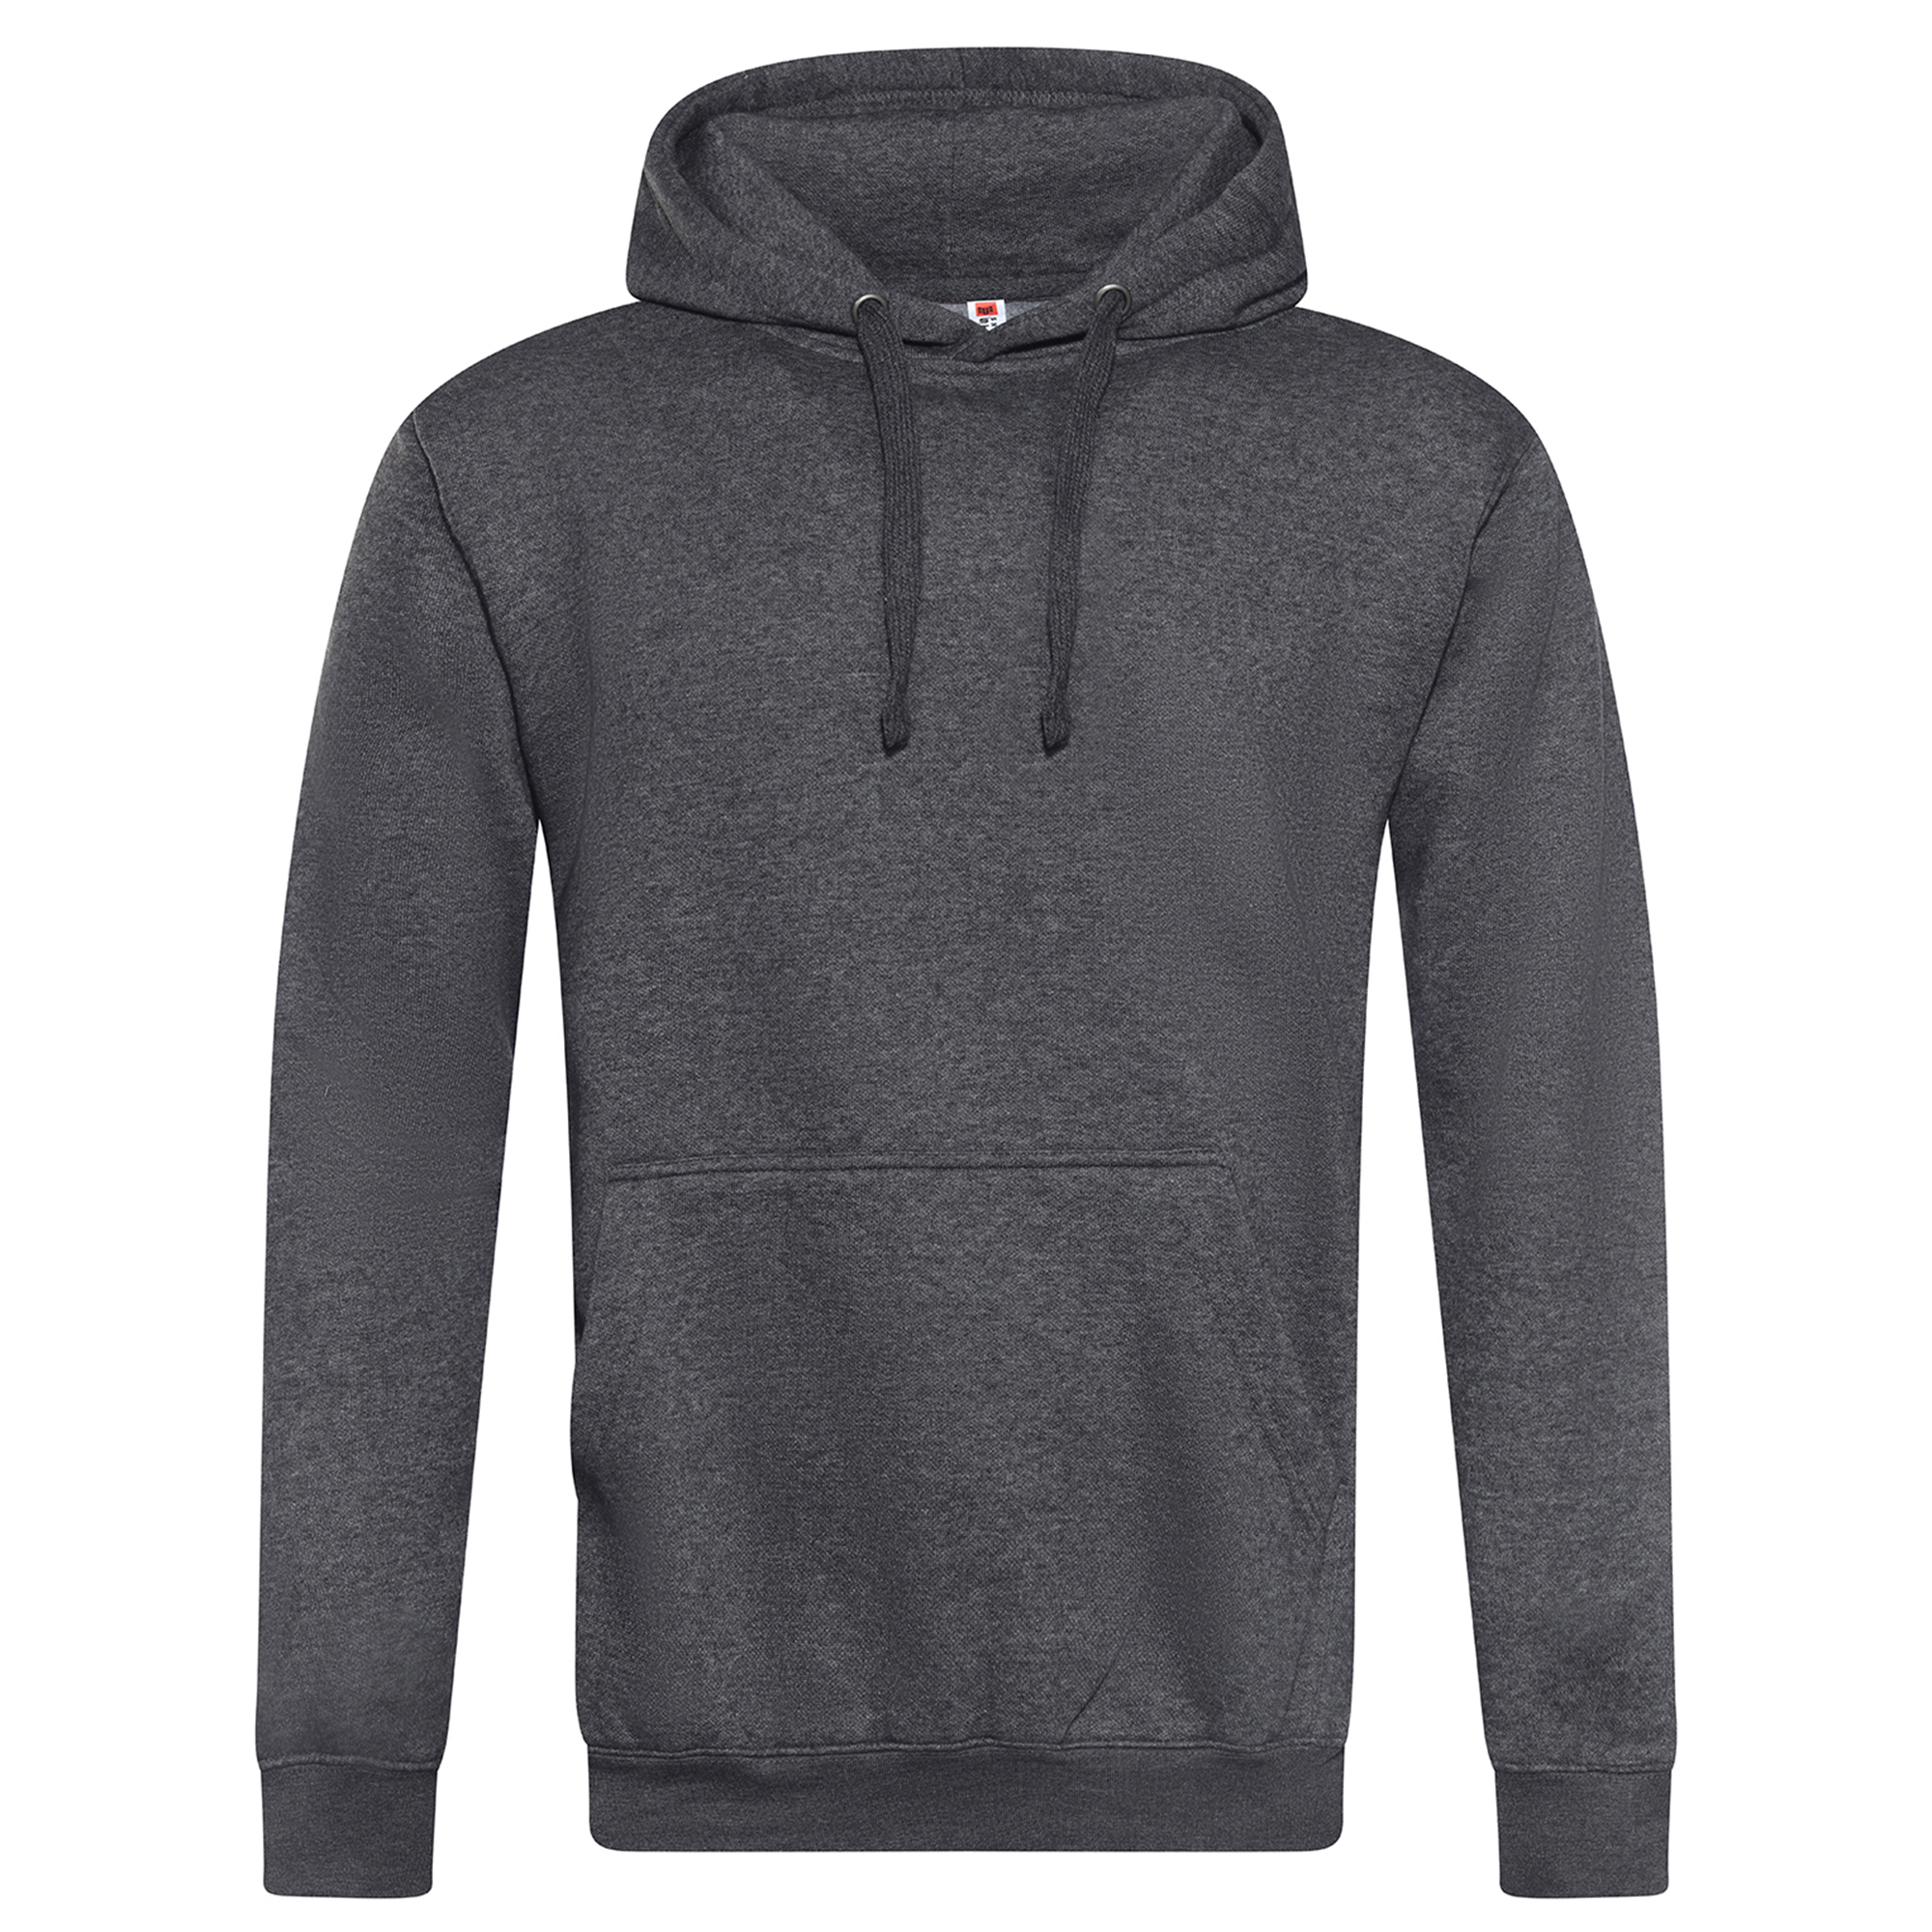 MidWeight Charcoal Hoodie